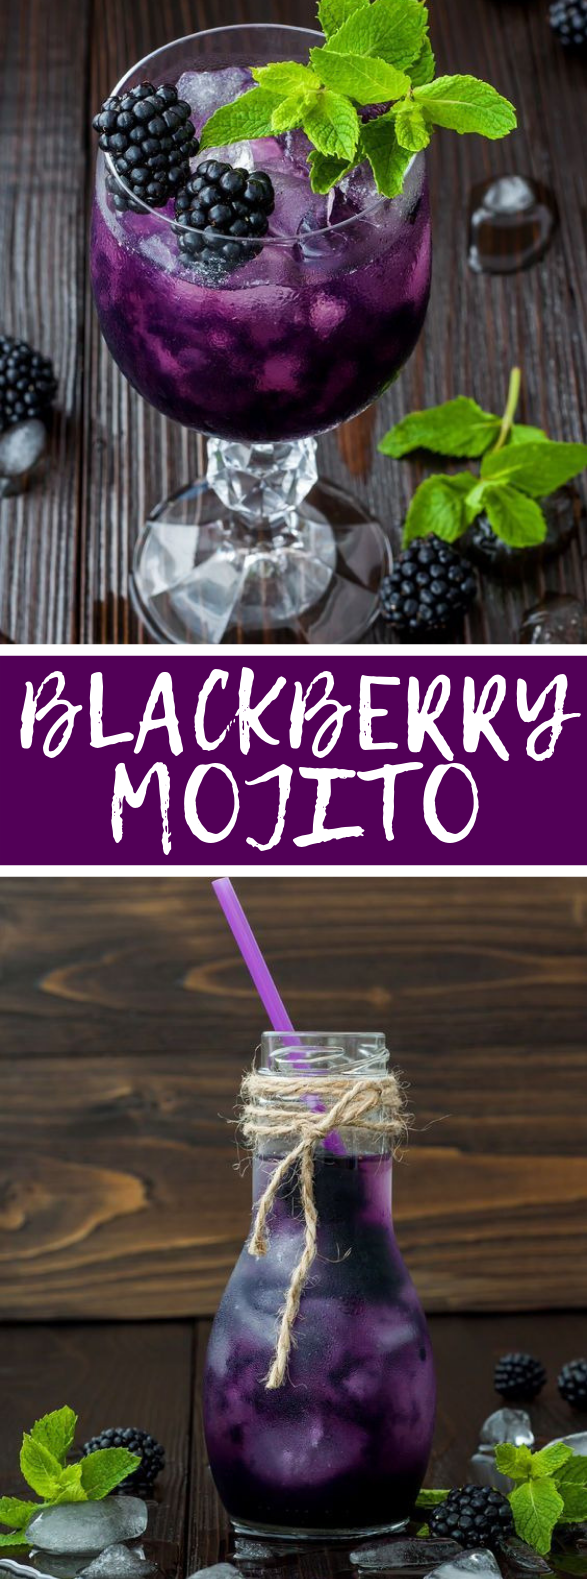 How to make a Blackberry Mojito #drinks #cocktails